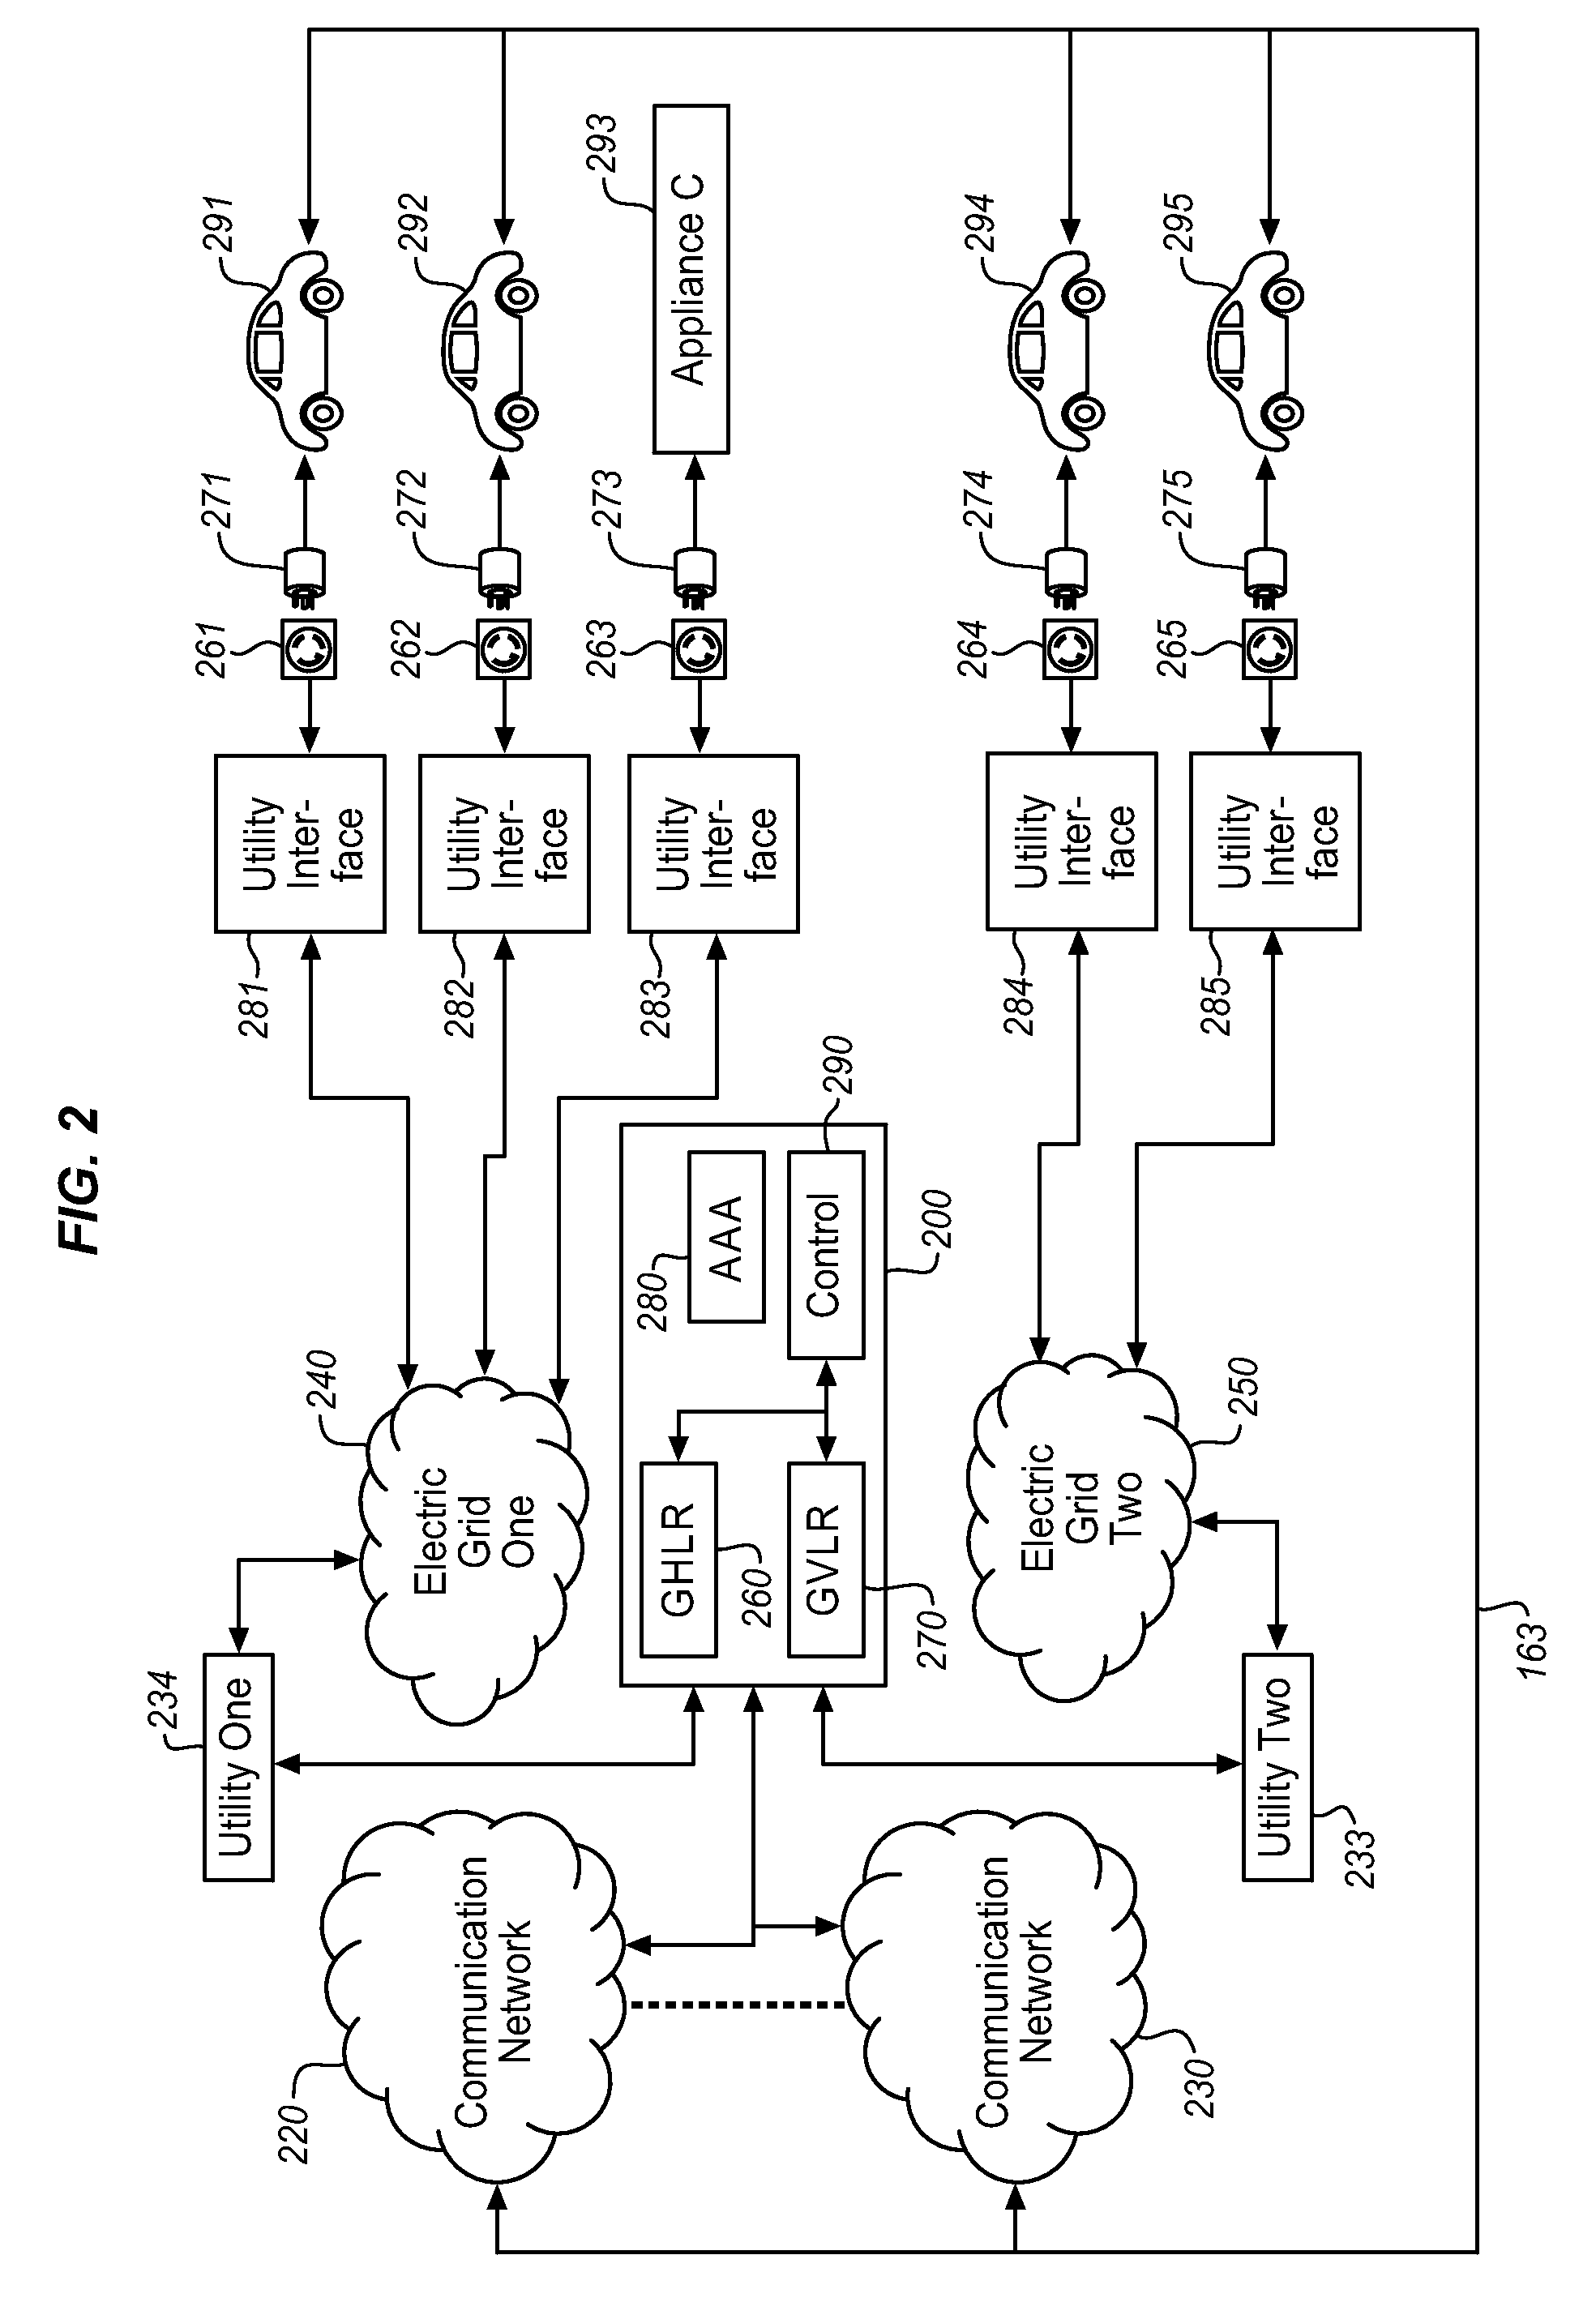 Dynamic load management for use in recharging vehicles equipped with electrically powered propulsion systems